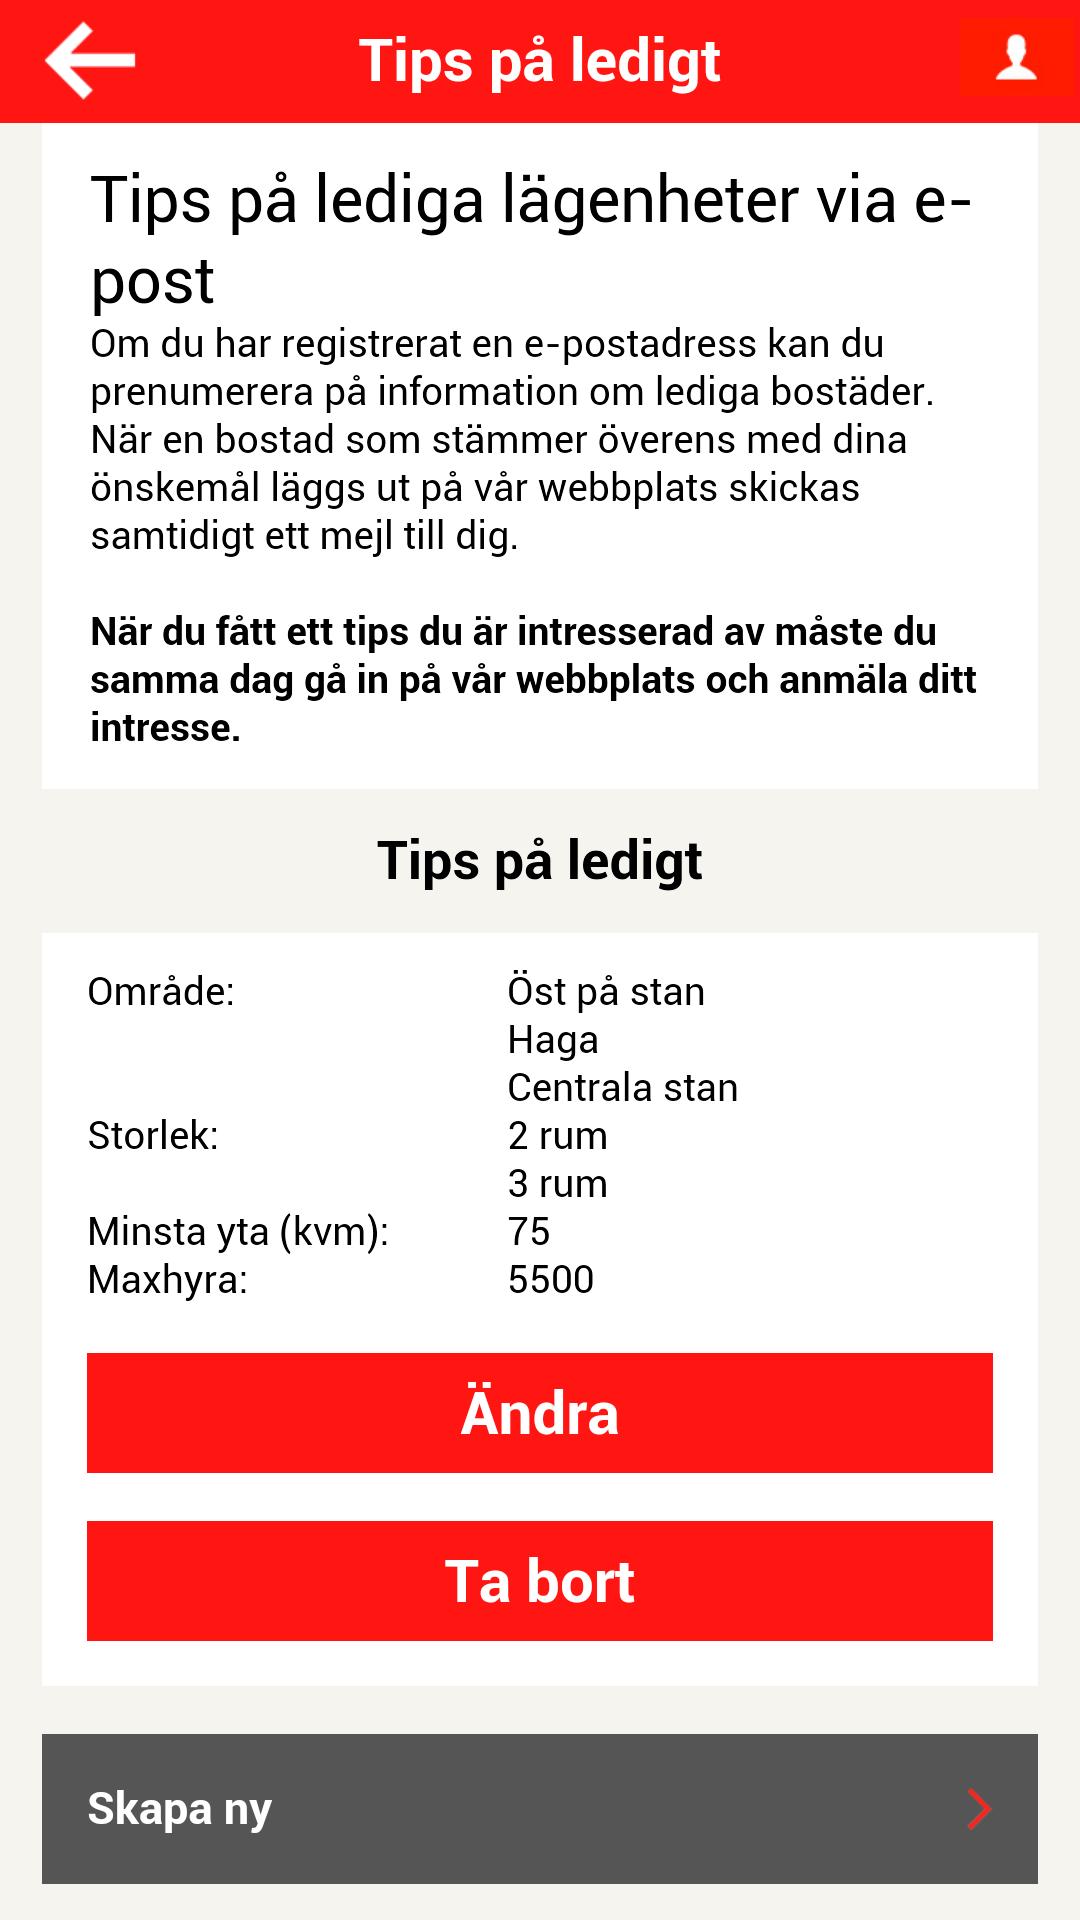 Bostaden for Android - APK Download